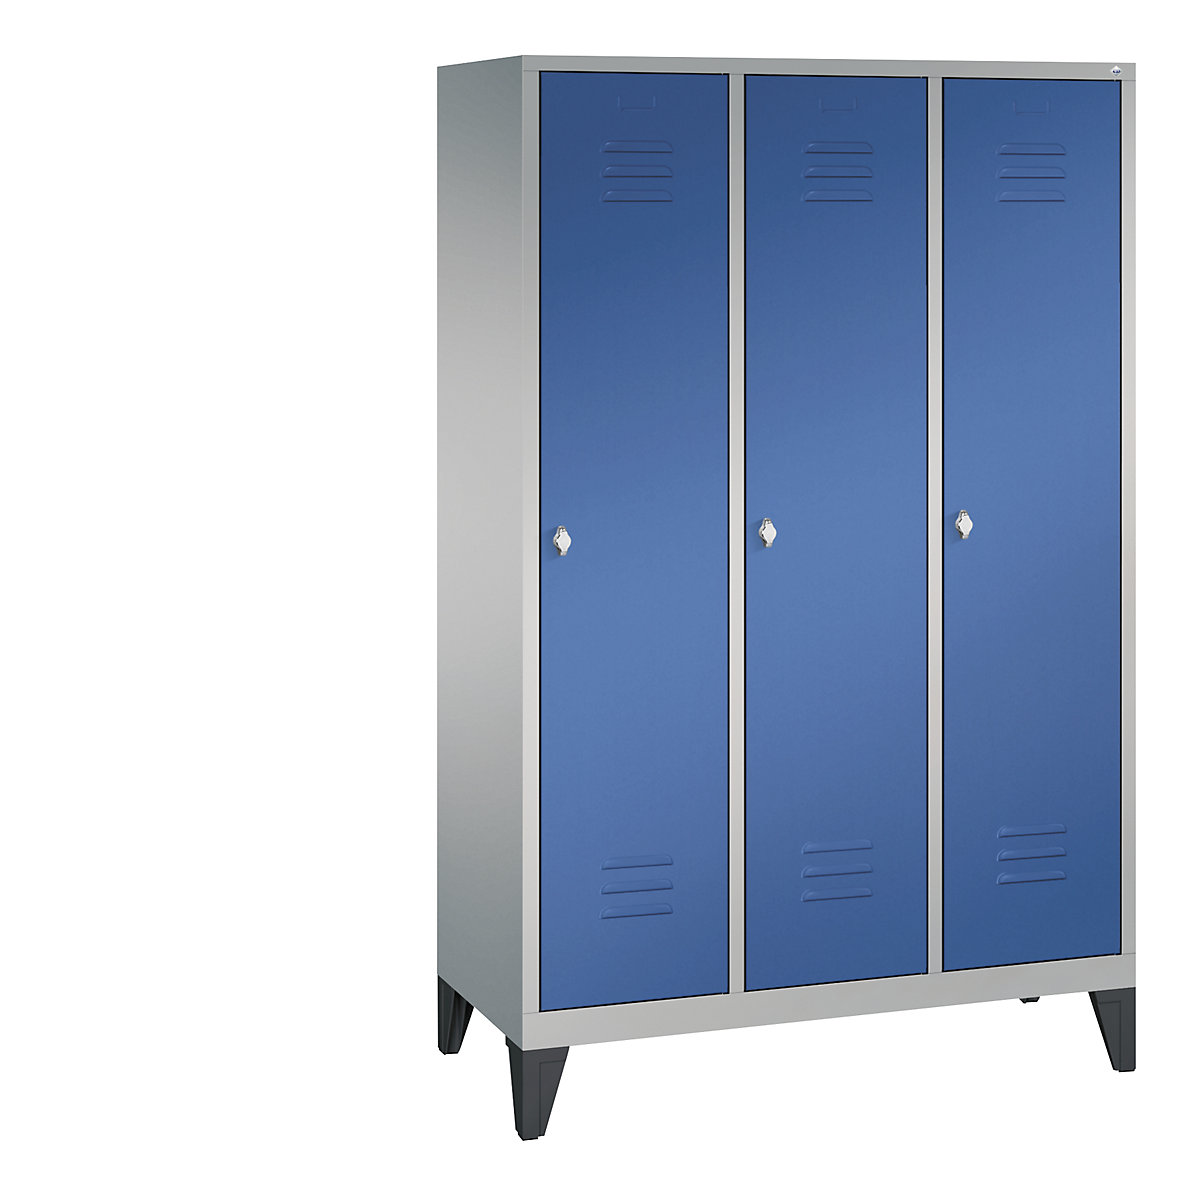 CLASSIC cloakroom locker with feet – C+P, 3 compartments, compartment width 400 mm, white aluminium / gentian blue-12